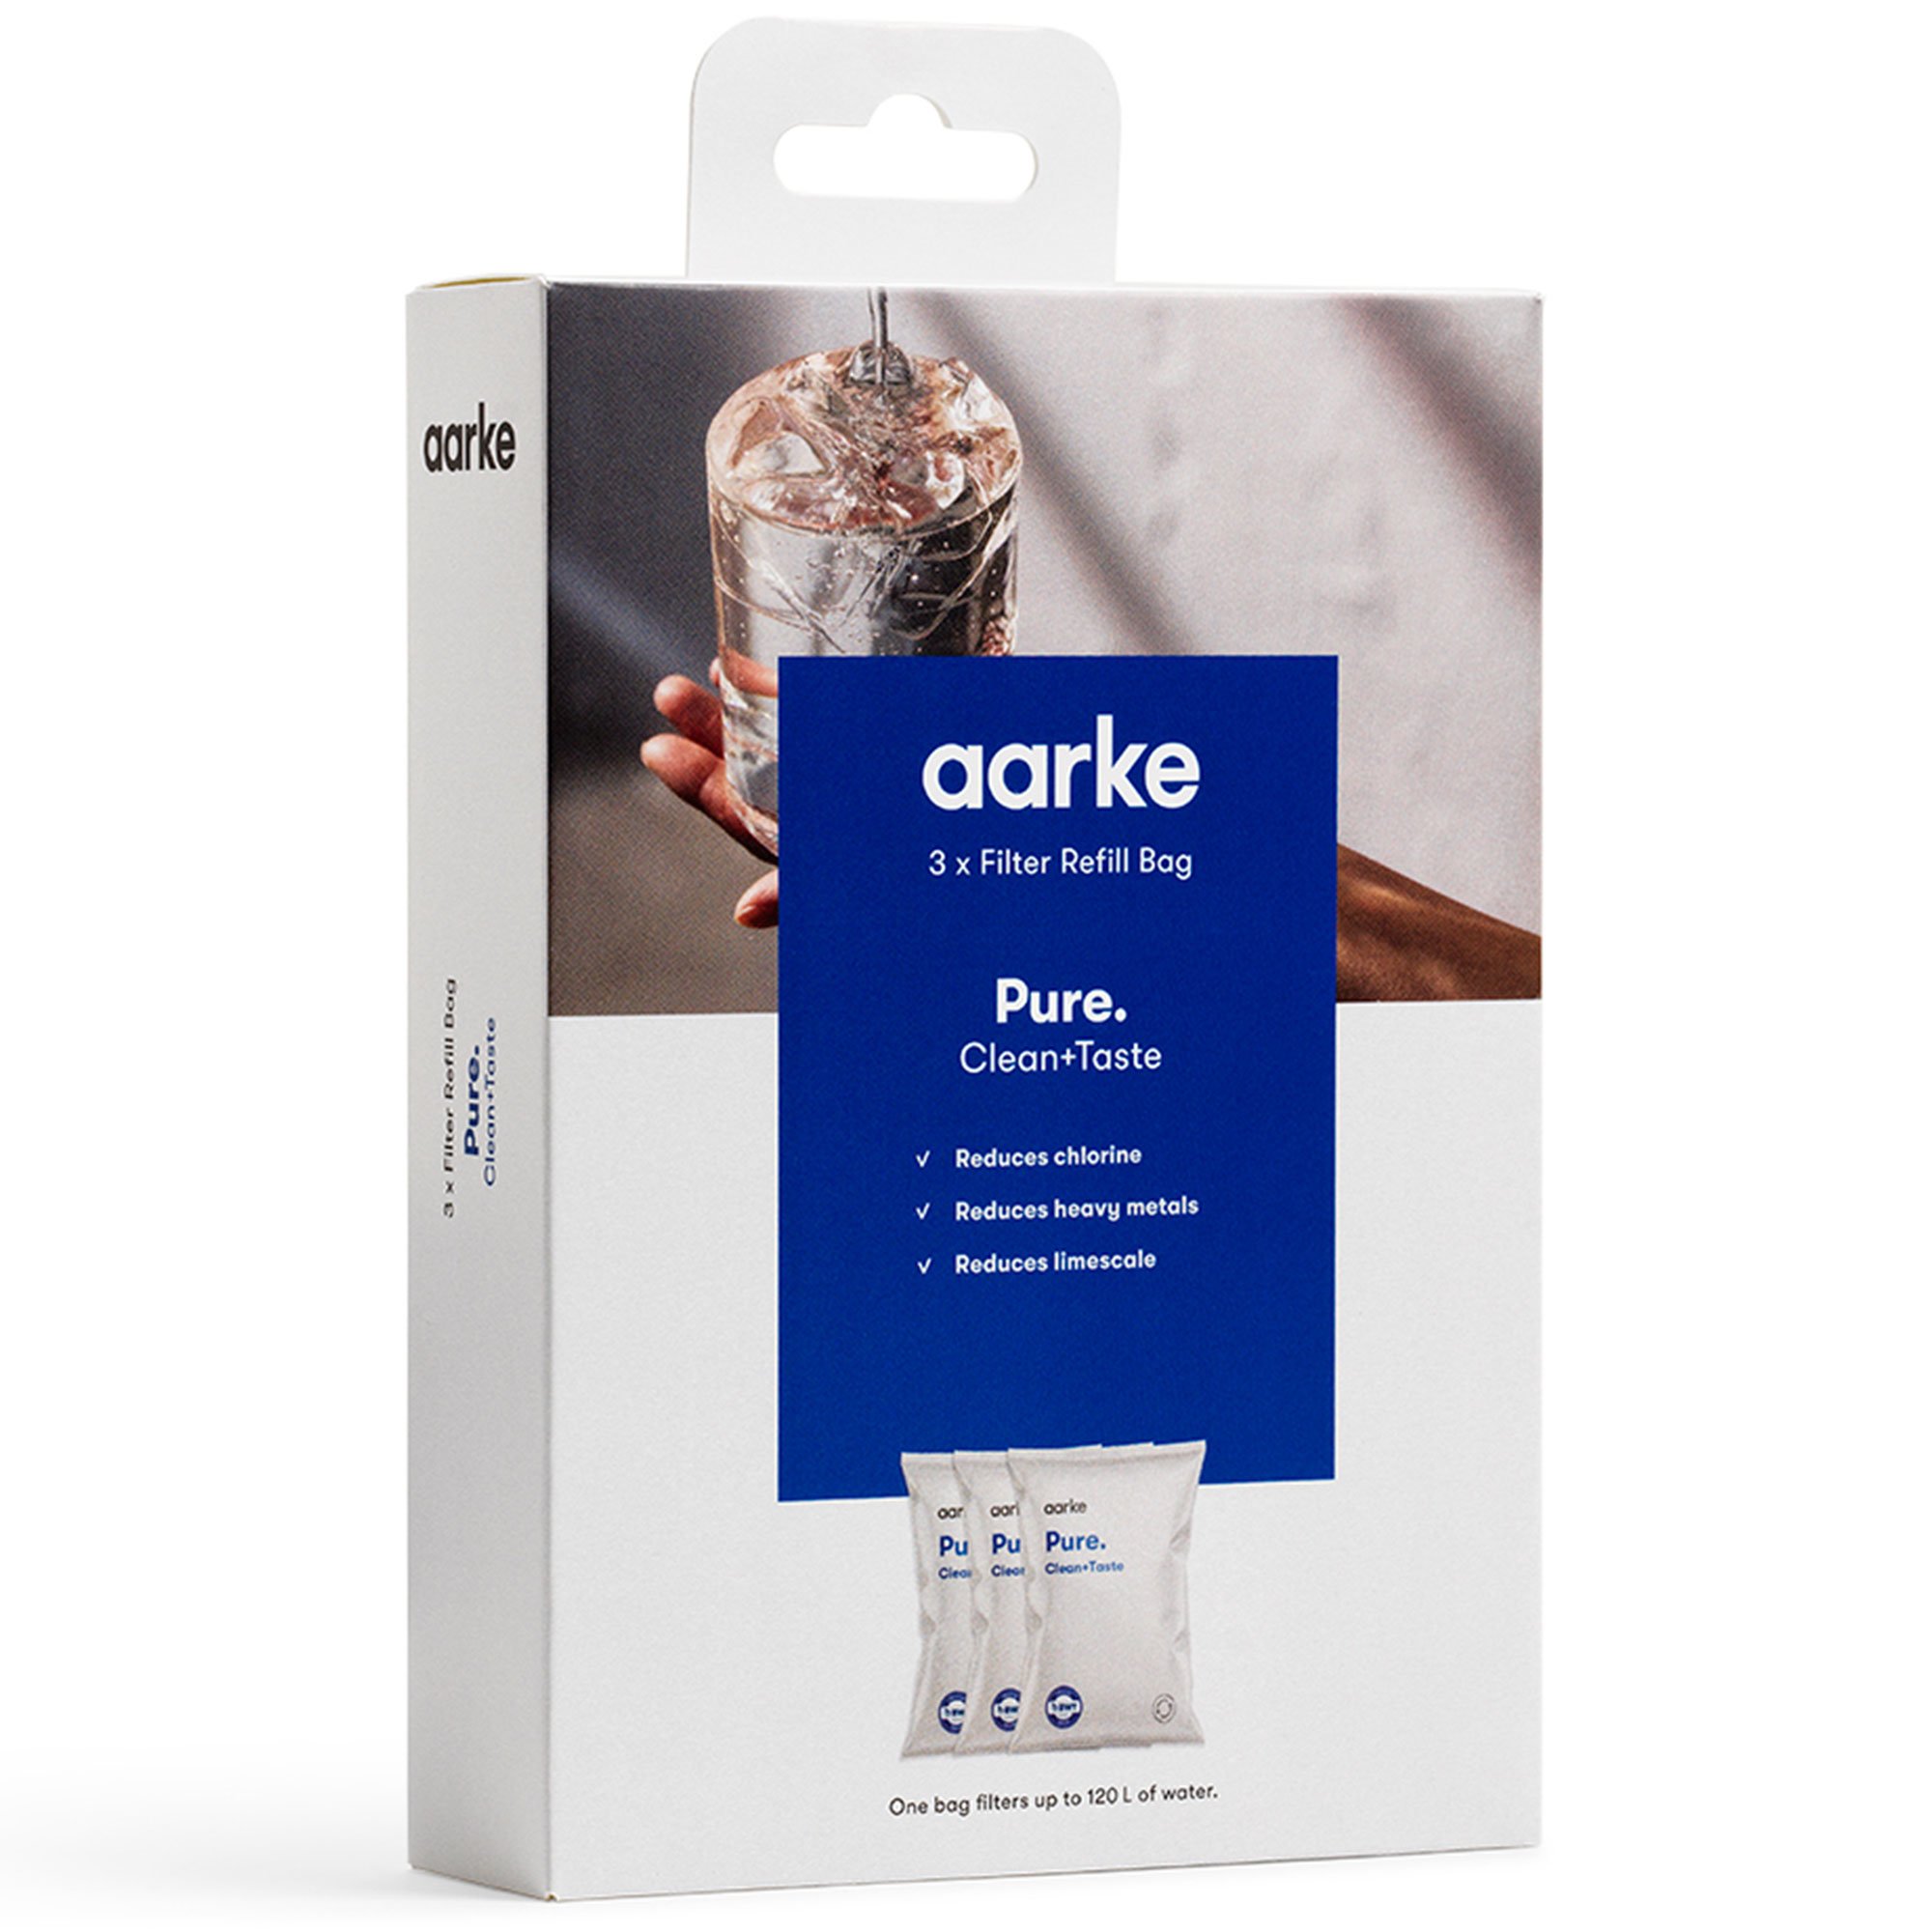 Aarke Pure Filter Refill 3-pack